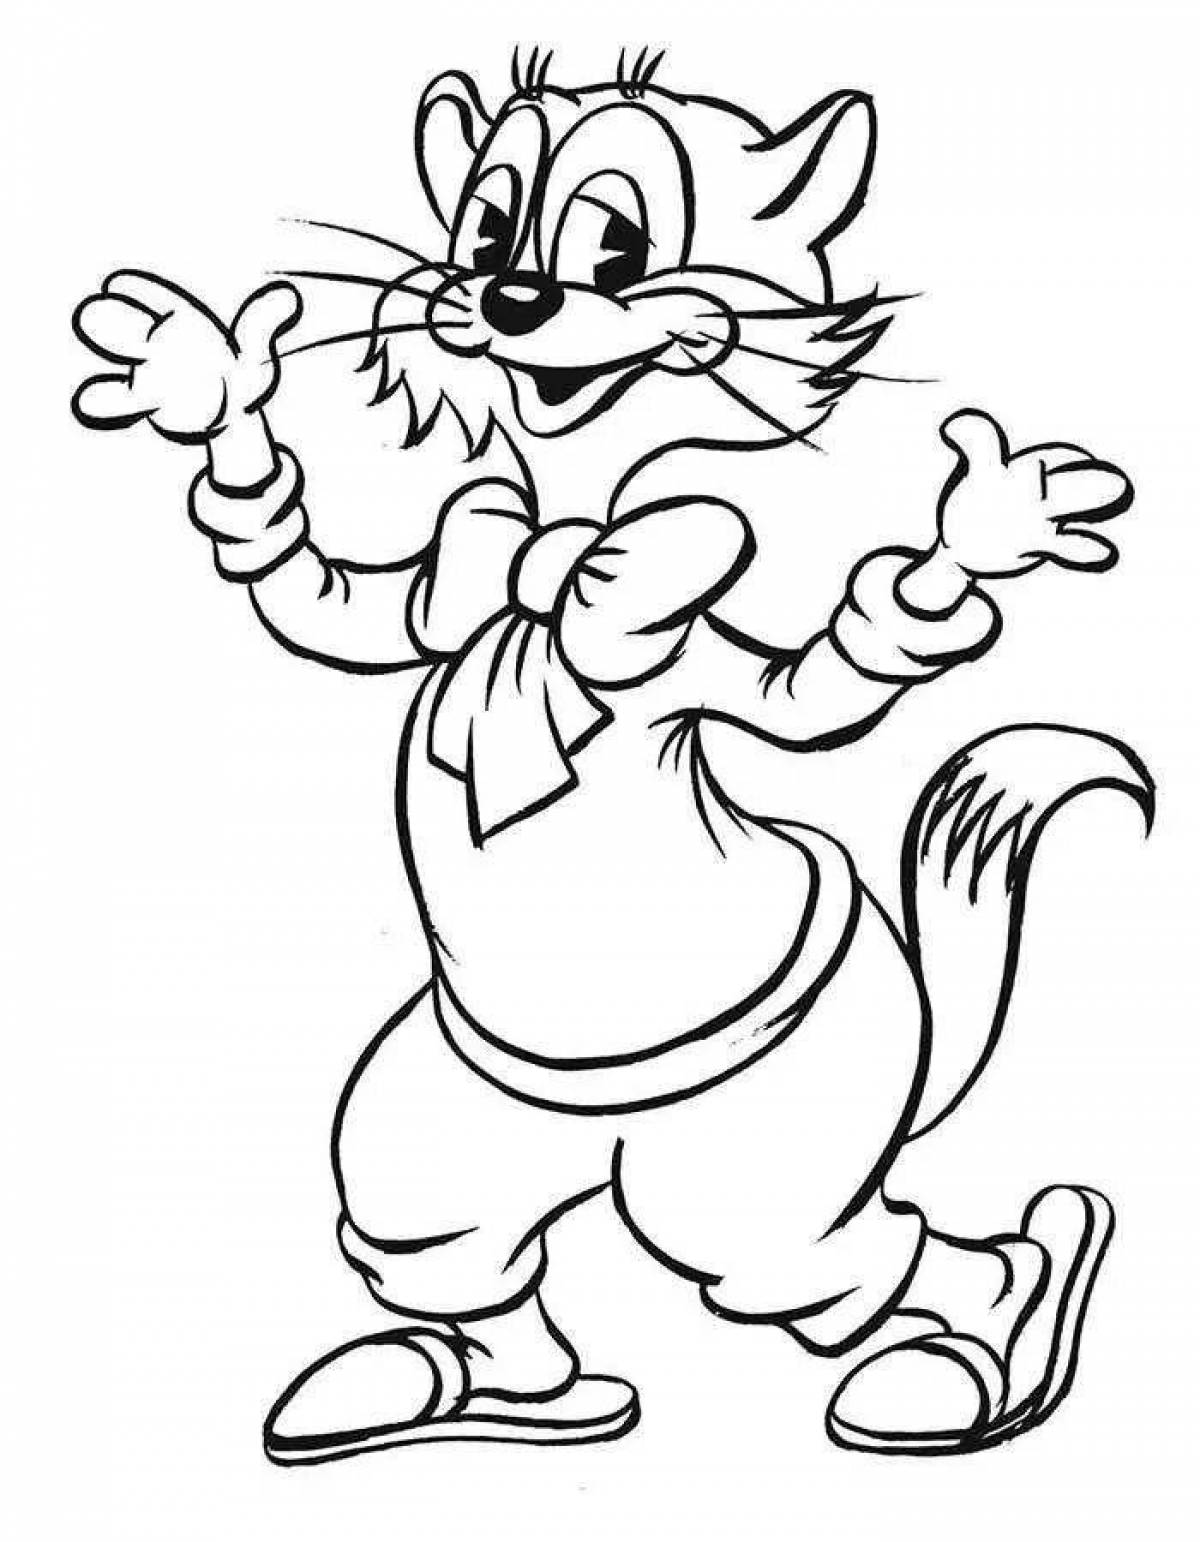 Fancy cartoon characters coloring page